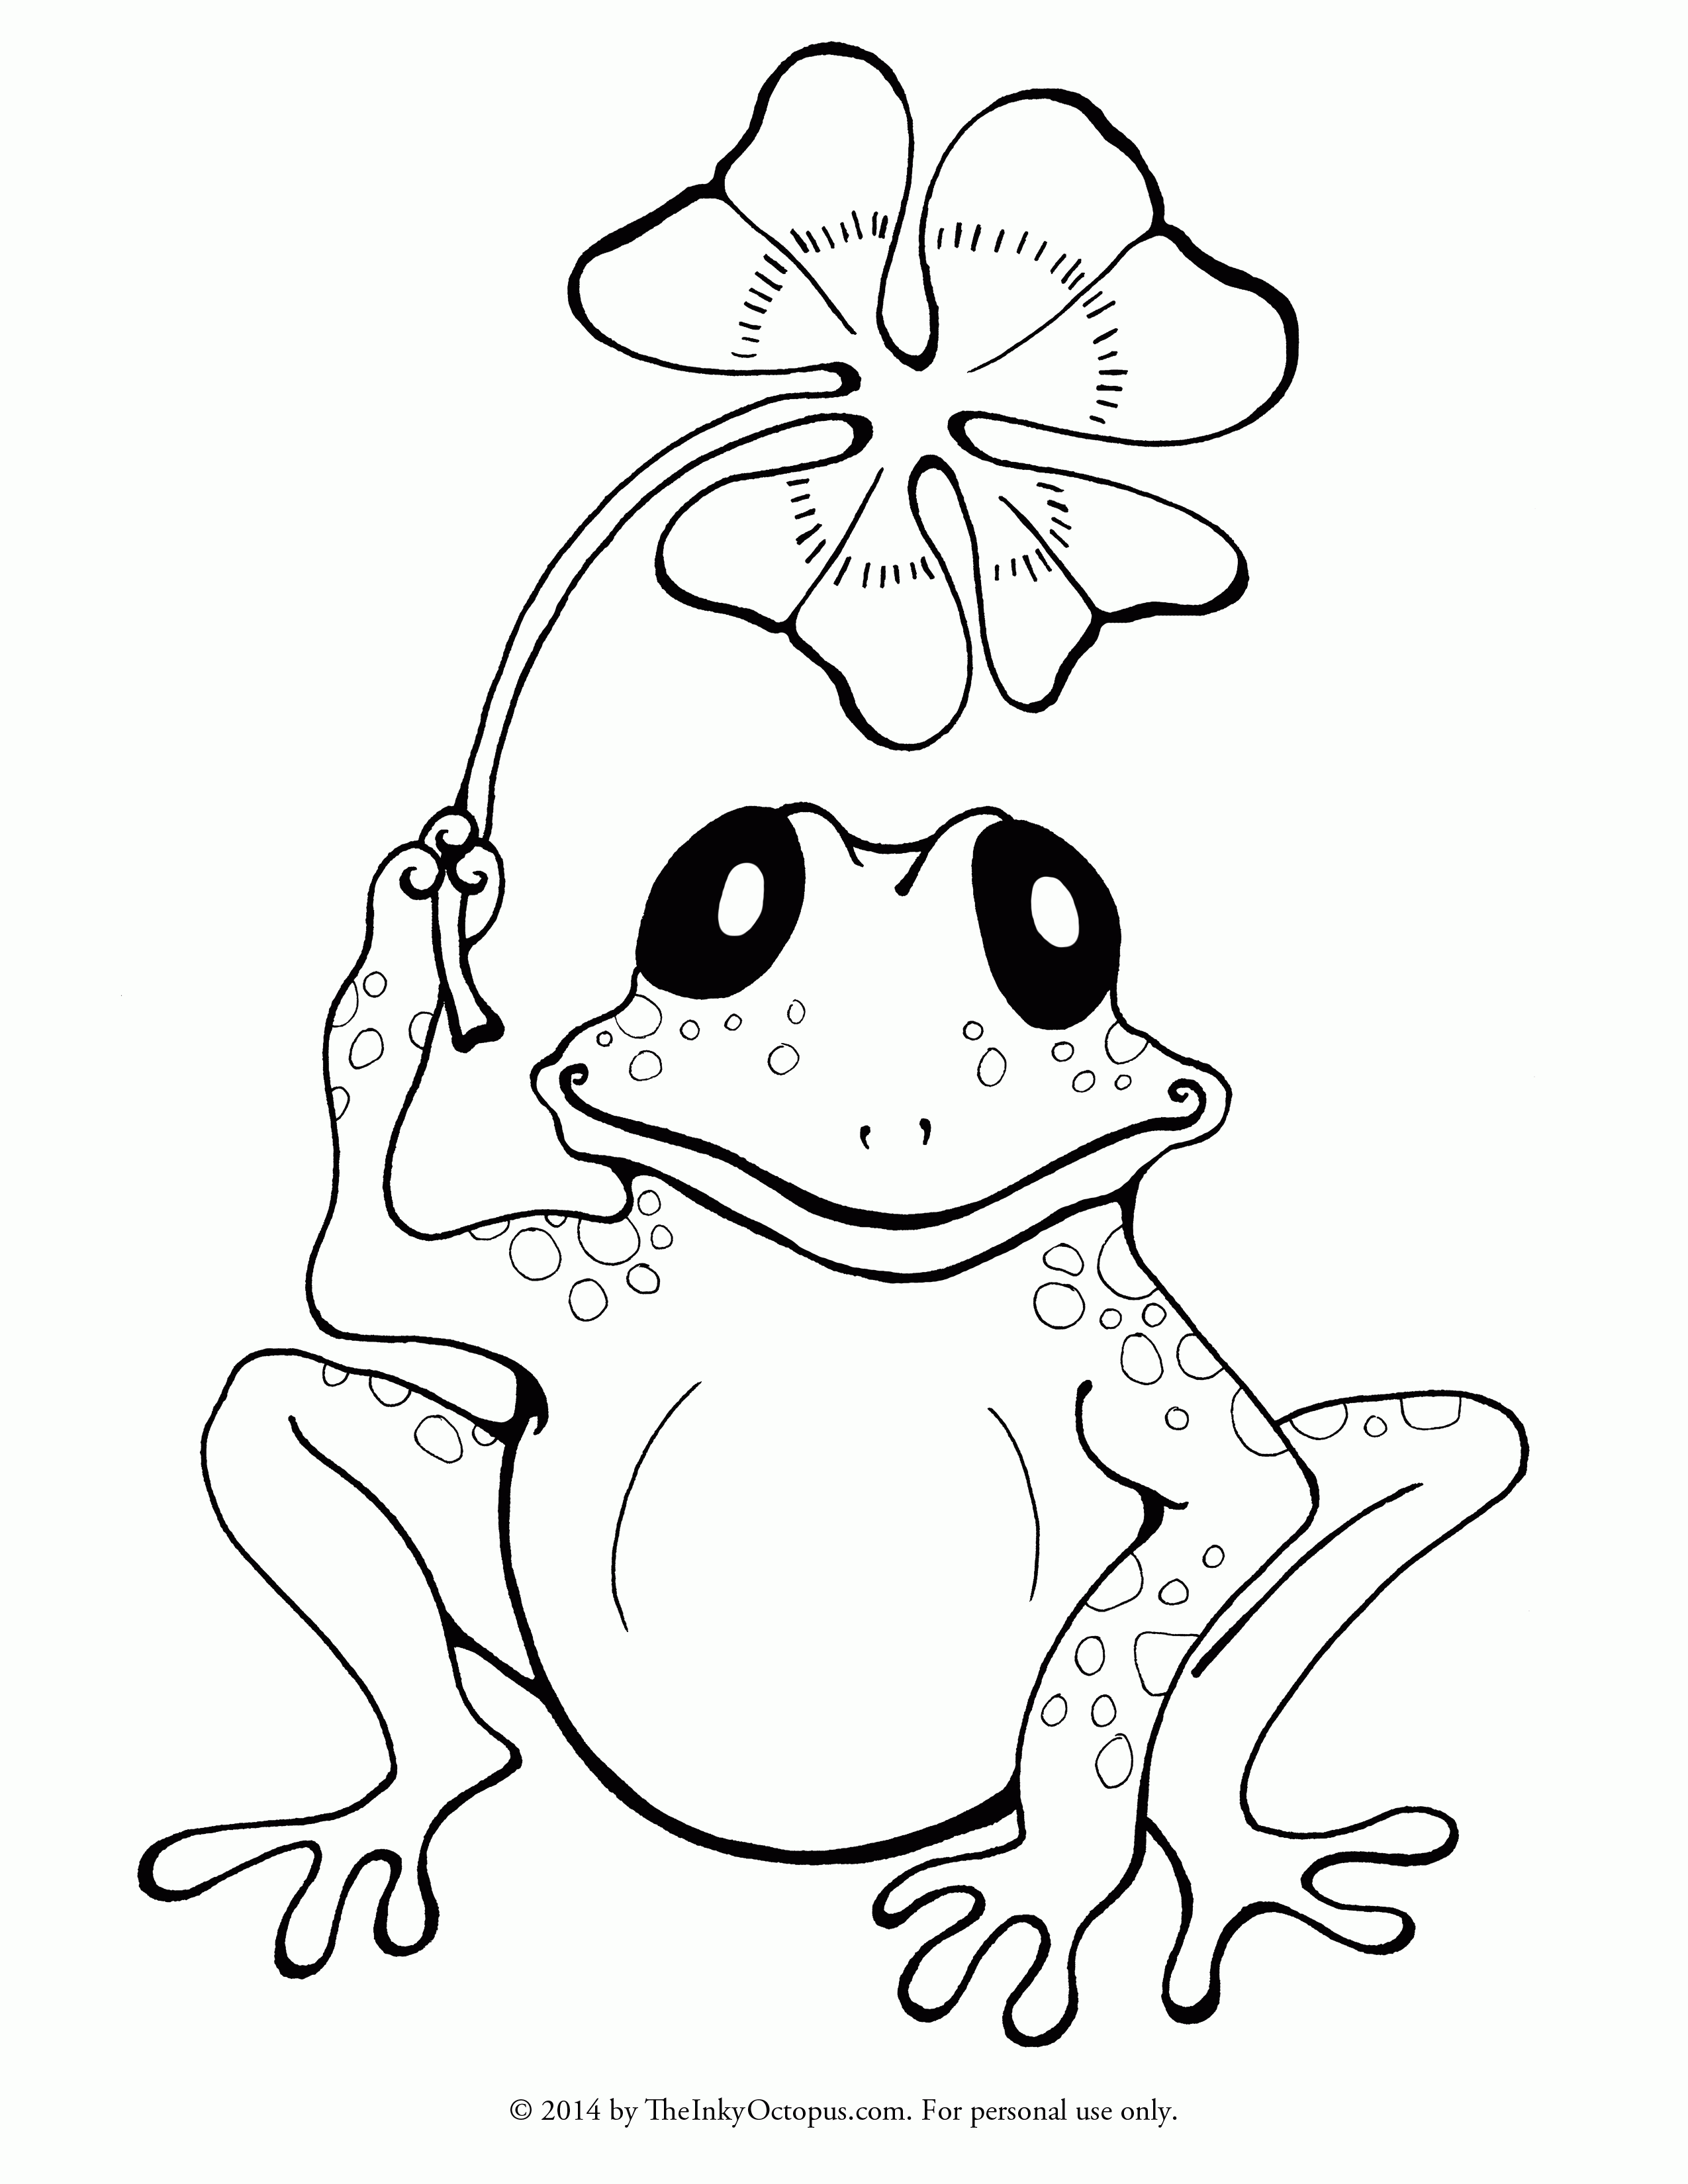 Coloring Pages Frogs - Coloring Page